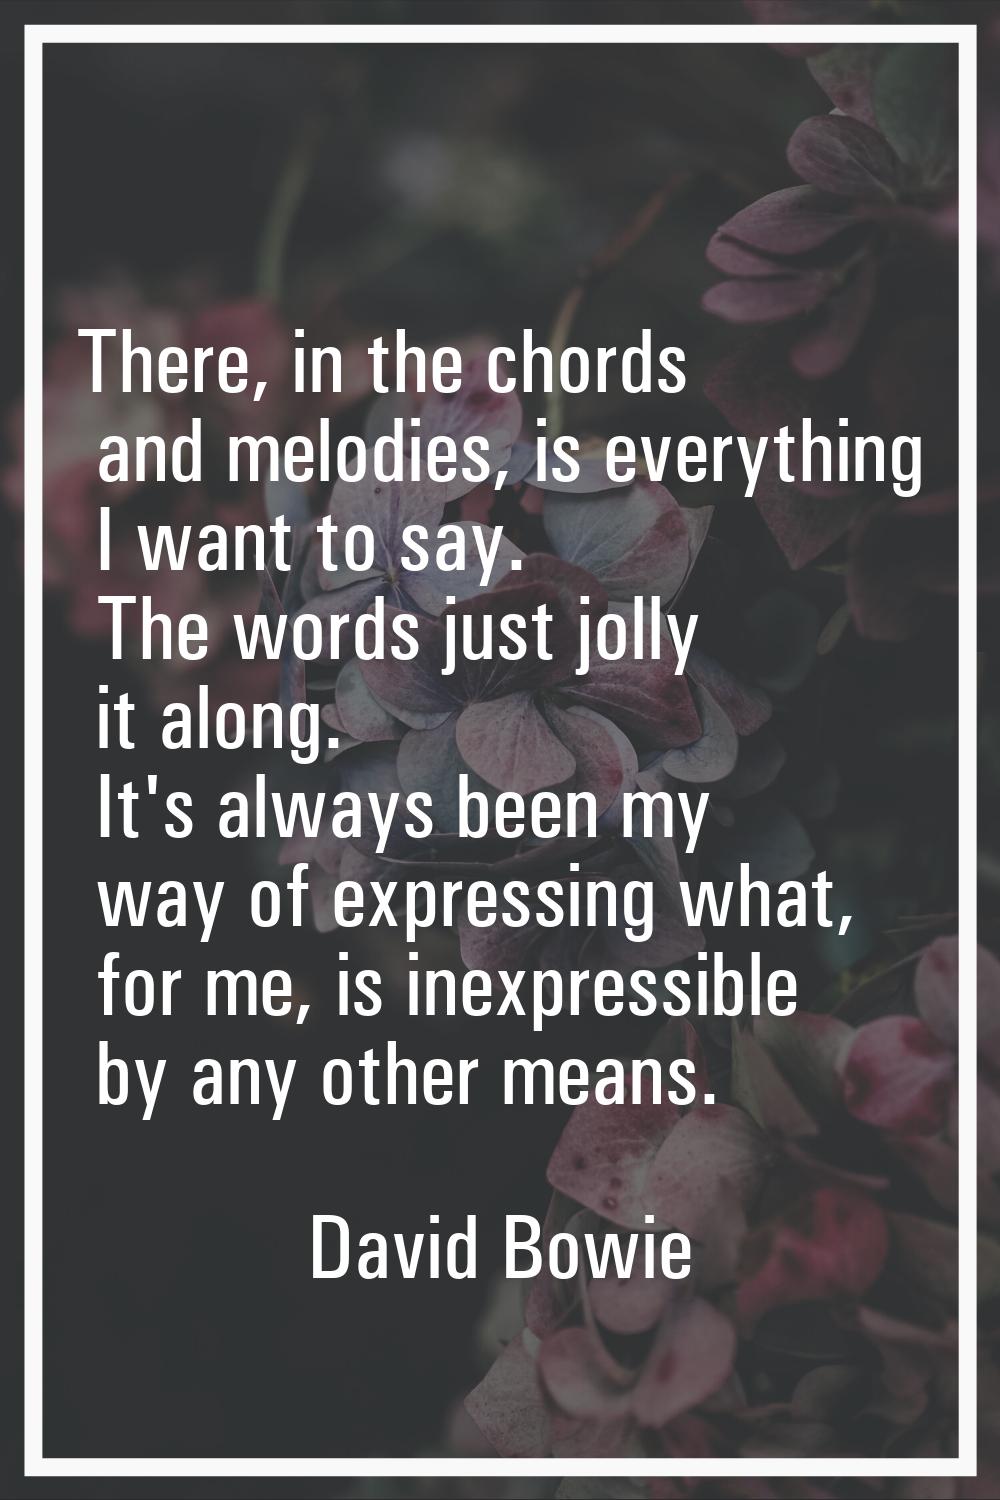 There, in the chords and melodies, is everything I want to say. The words just jolly it along. It's